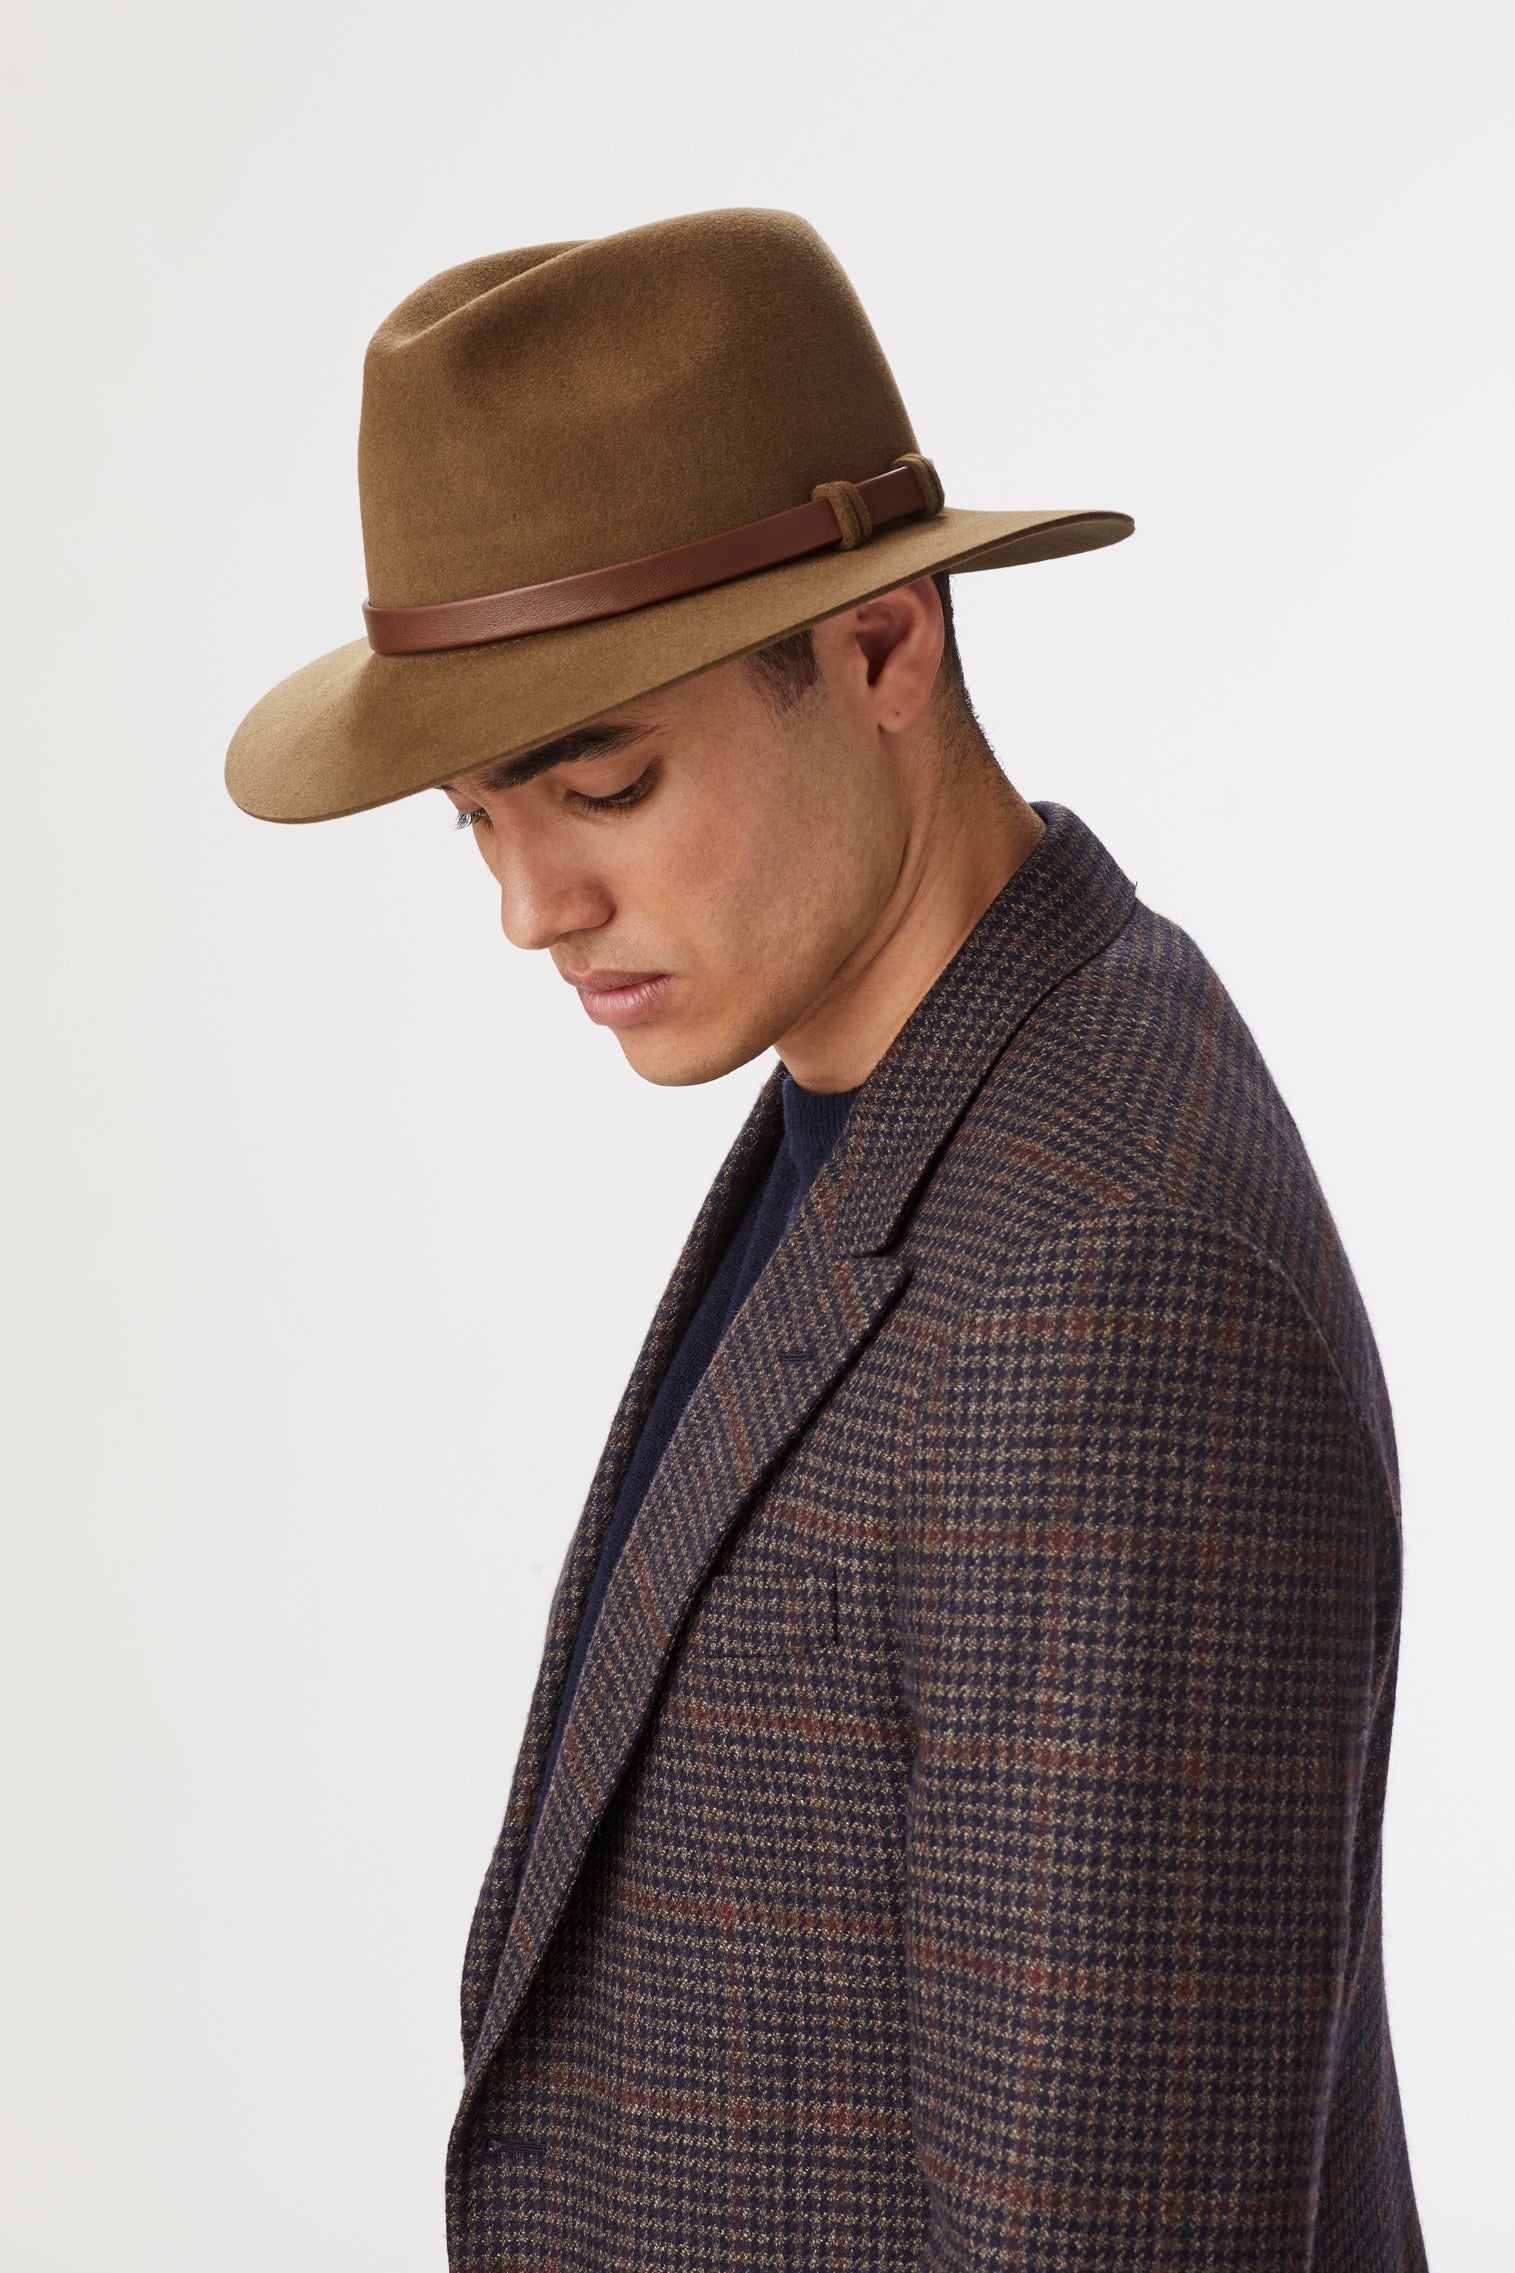 Chepstow Trilby - Hats for Oval Face Shapes - Lock & Co. Hatters London UK